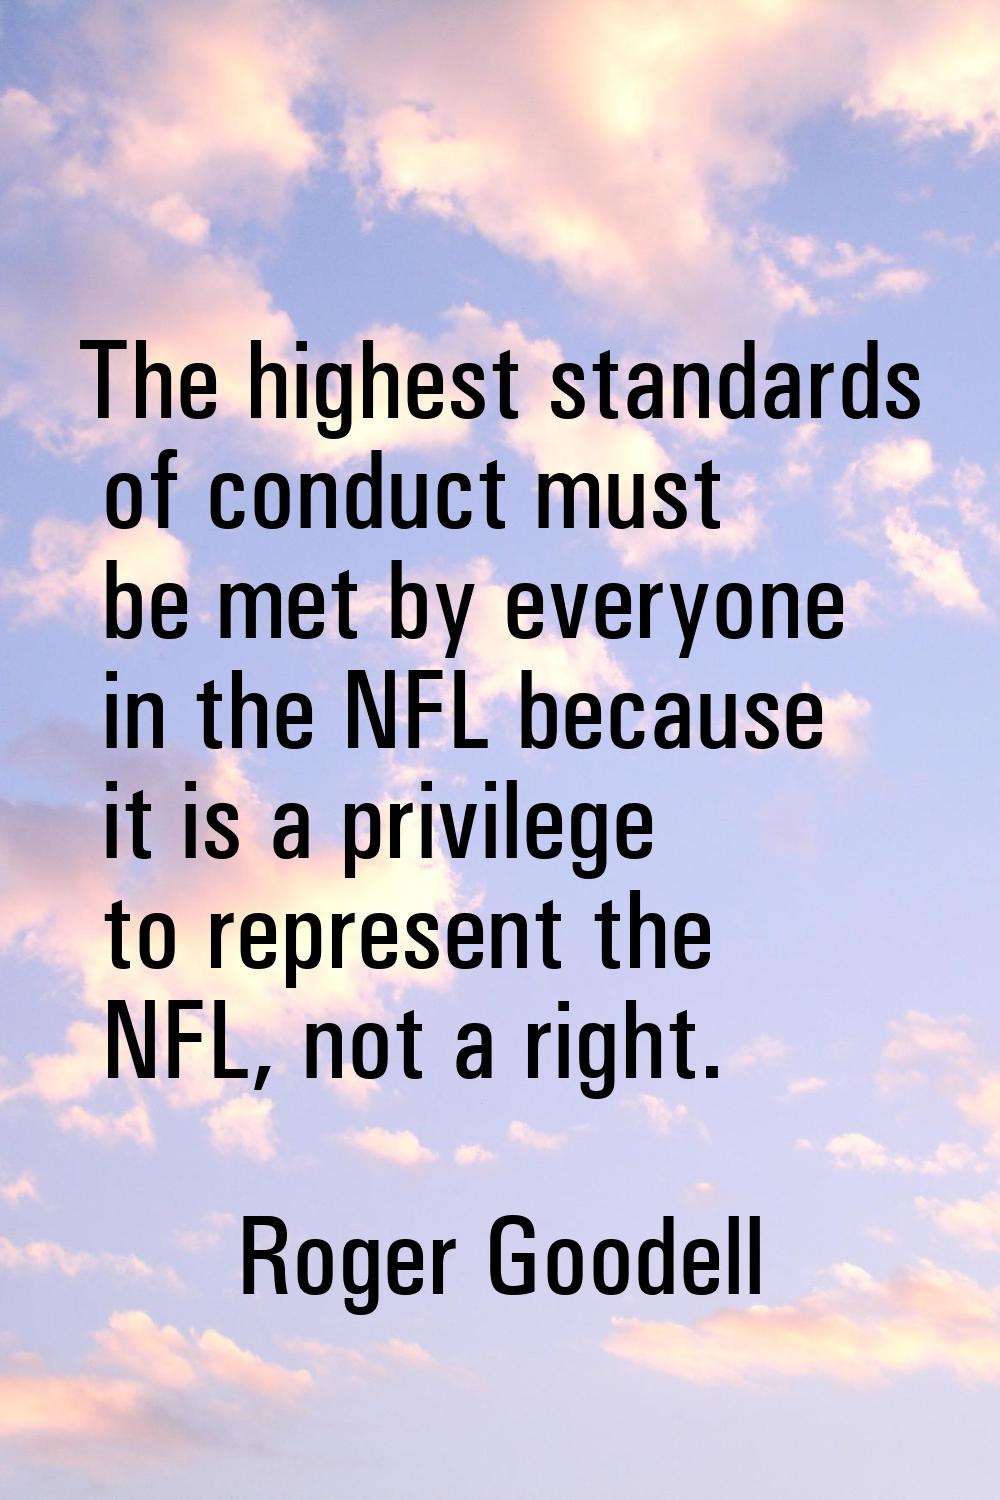 The highest standards of conduct must be met by everyone in the NFL because it is a privilege to re